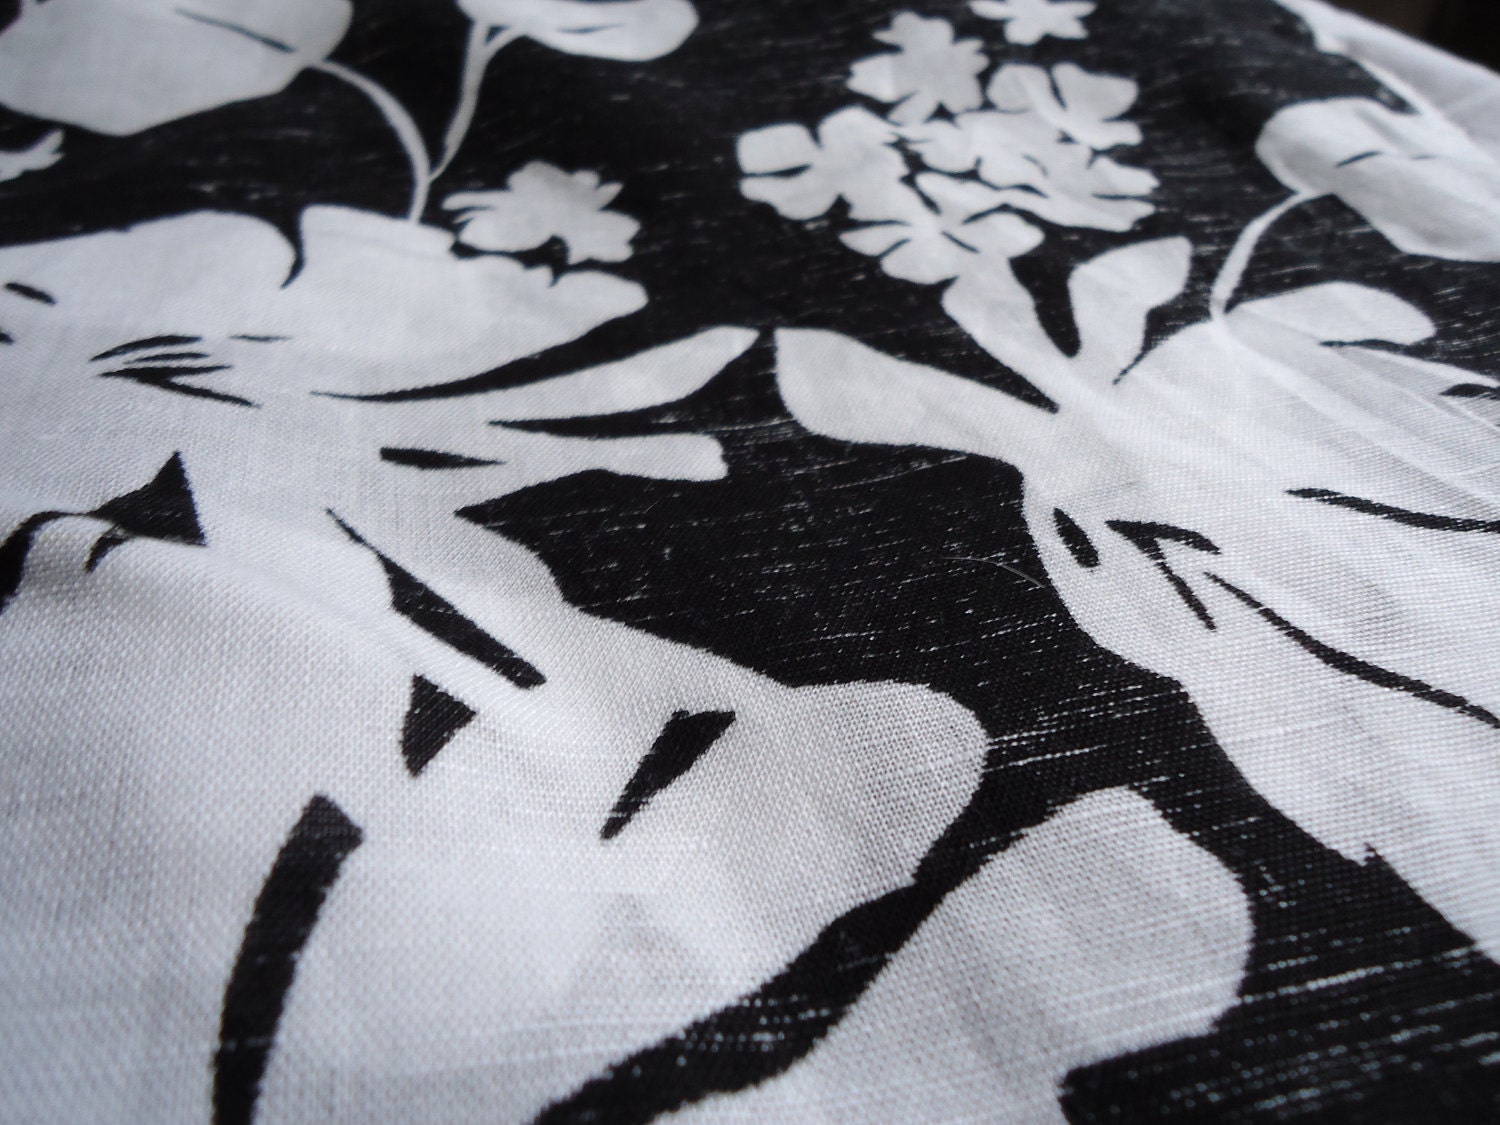 4 yards black and white floral printed linen/rayon